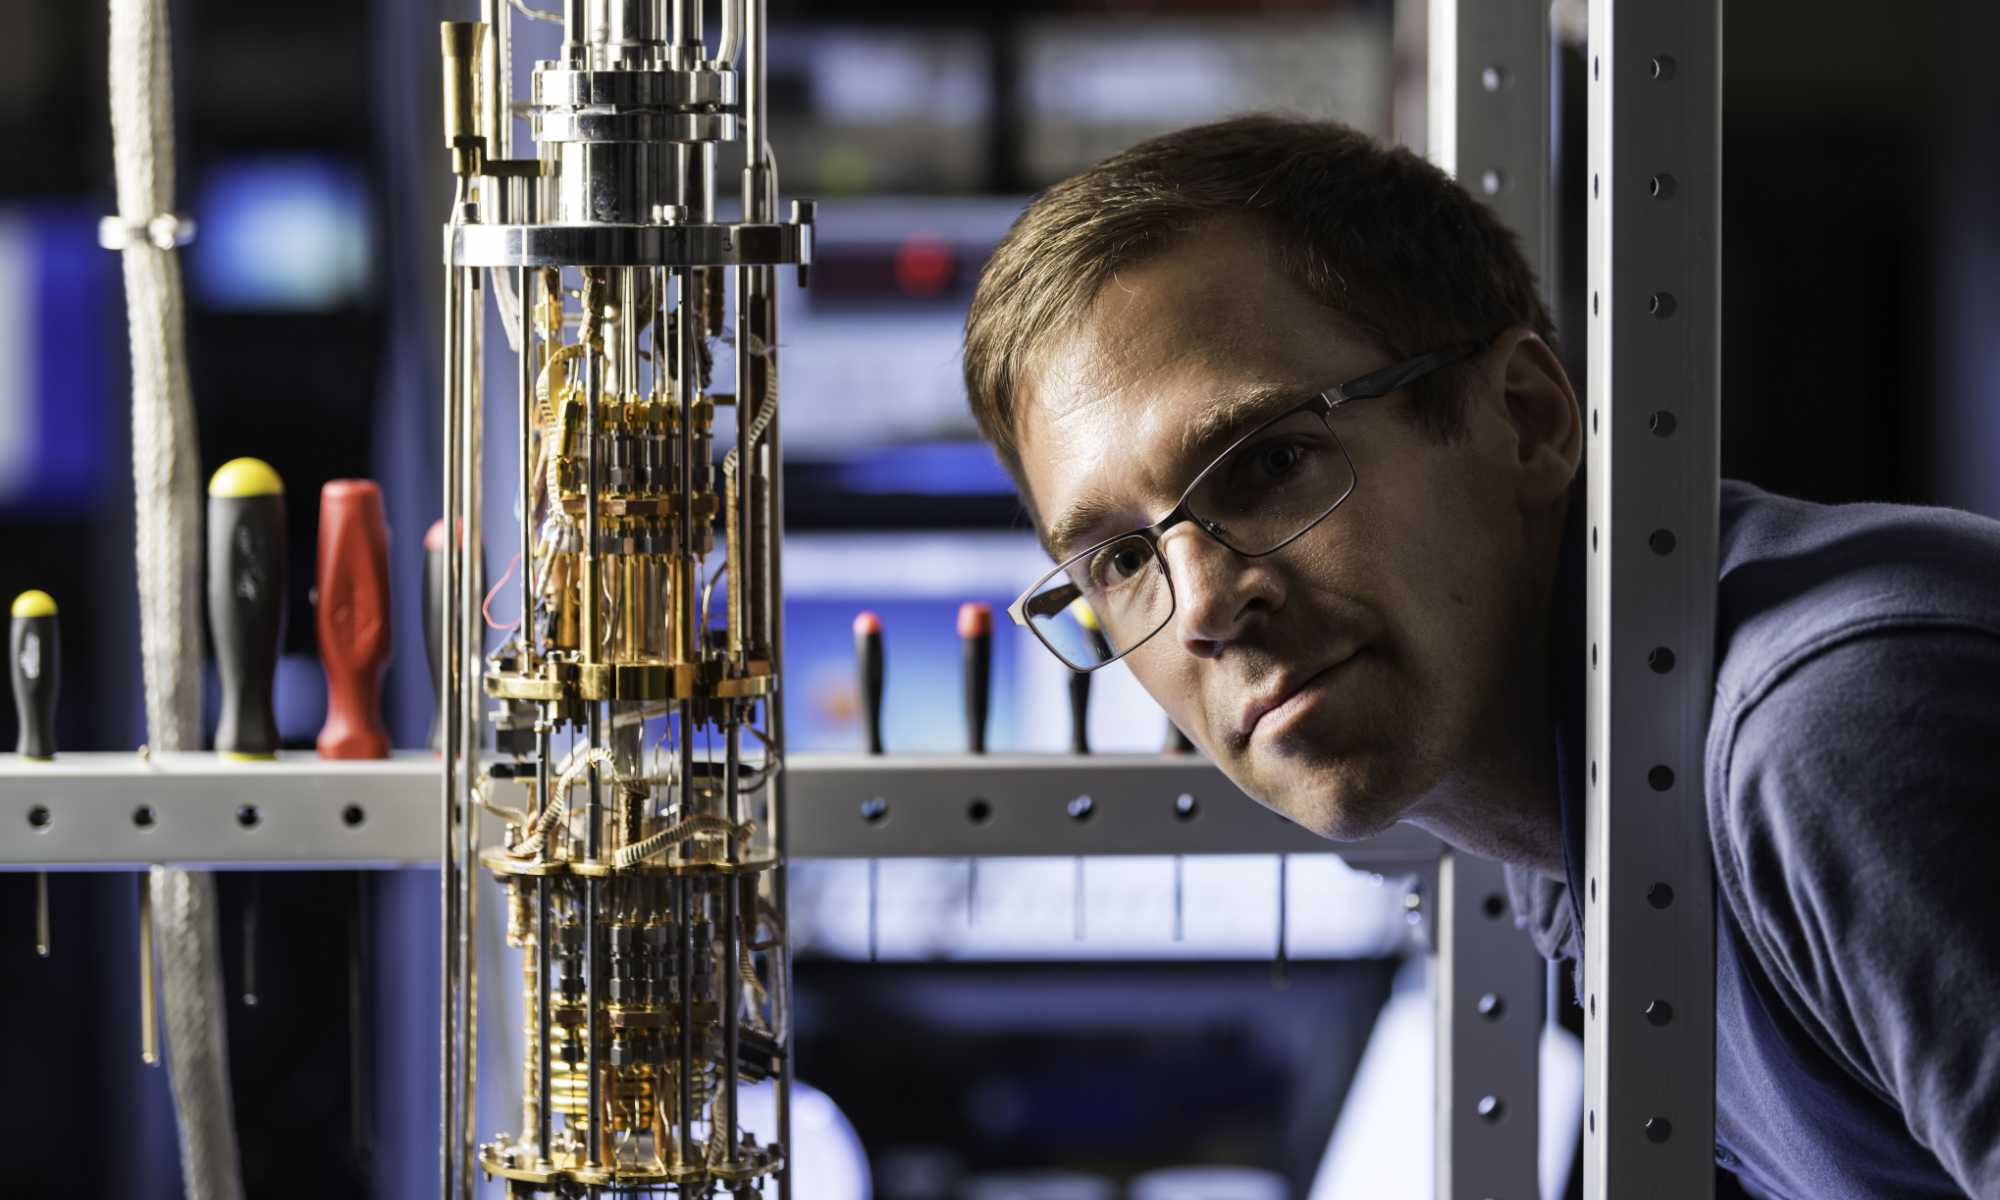 John Nichol faces the camera with his head and shoulders near a dilution refrigerator, which he uses to study thermoelectricity at the nanoscale level.